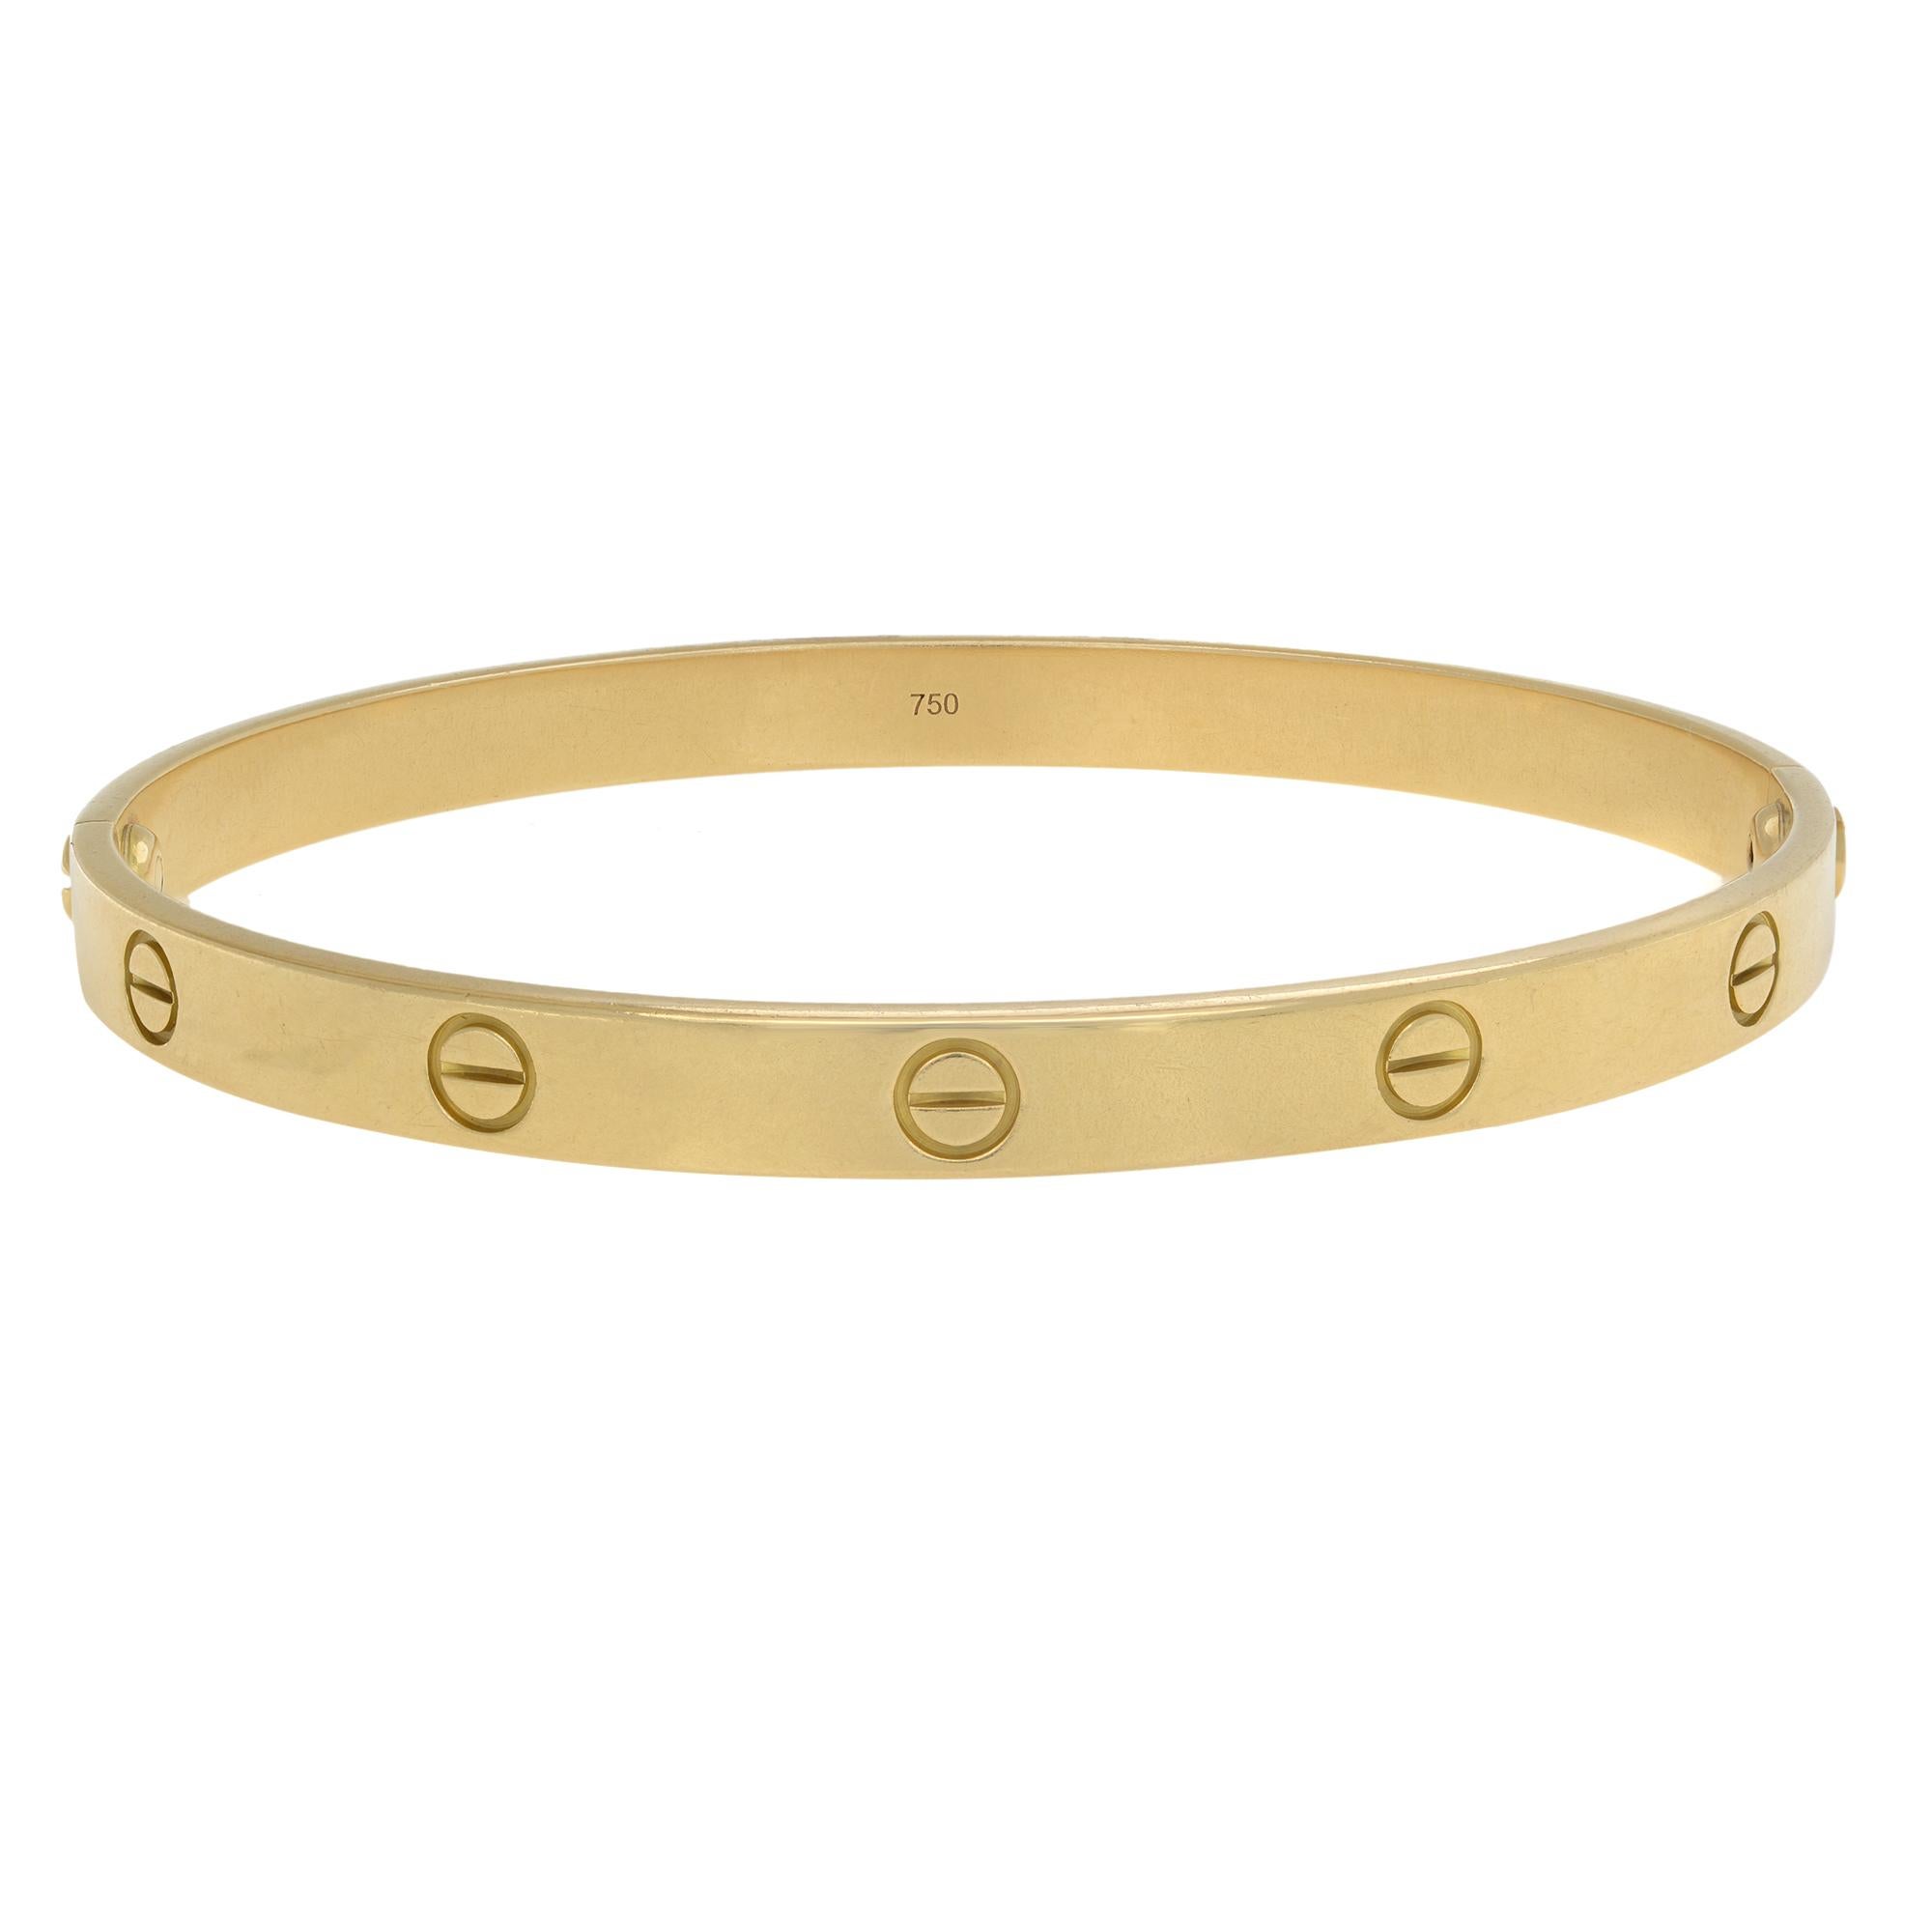 Cartier classic Love bracelet in 18K yellow gold. Size 21. Old style screw system. Width: 6.1mm. Great pre-owned condition. Comes with Cartier box and screw driver. Papers are not included.